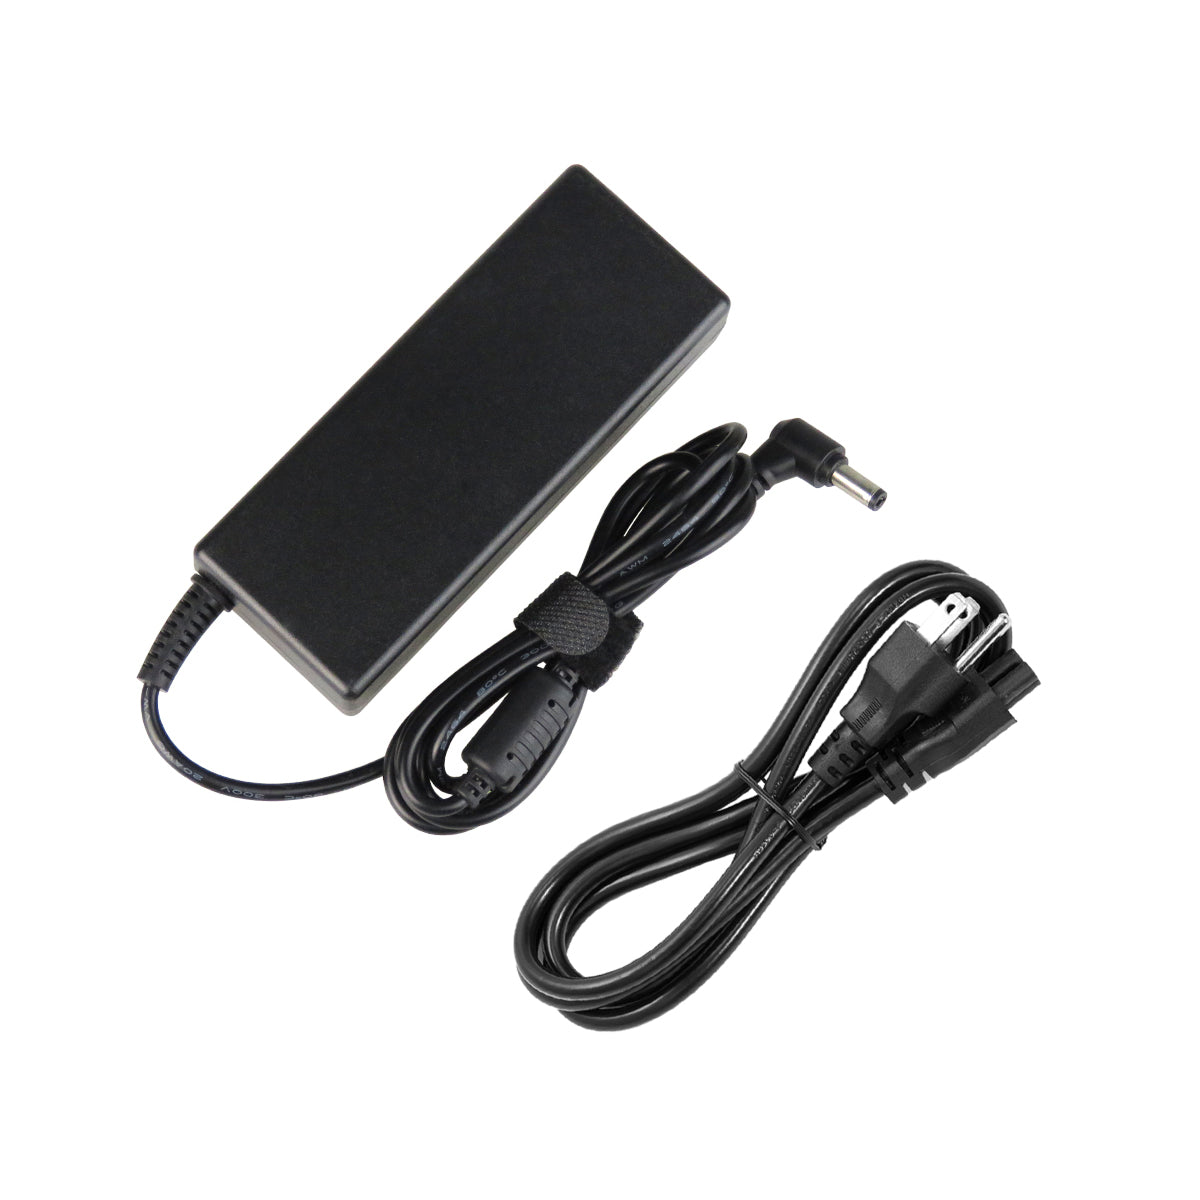 AC Adapter Charger for ASUS K43 Notebook.